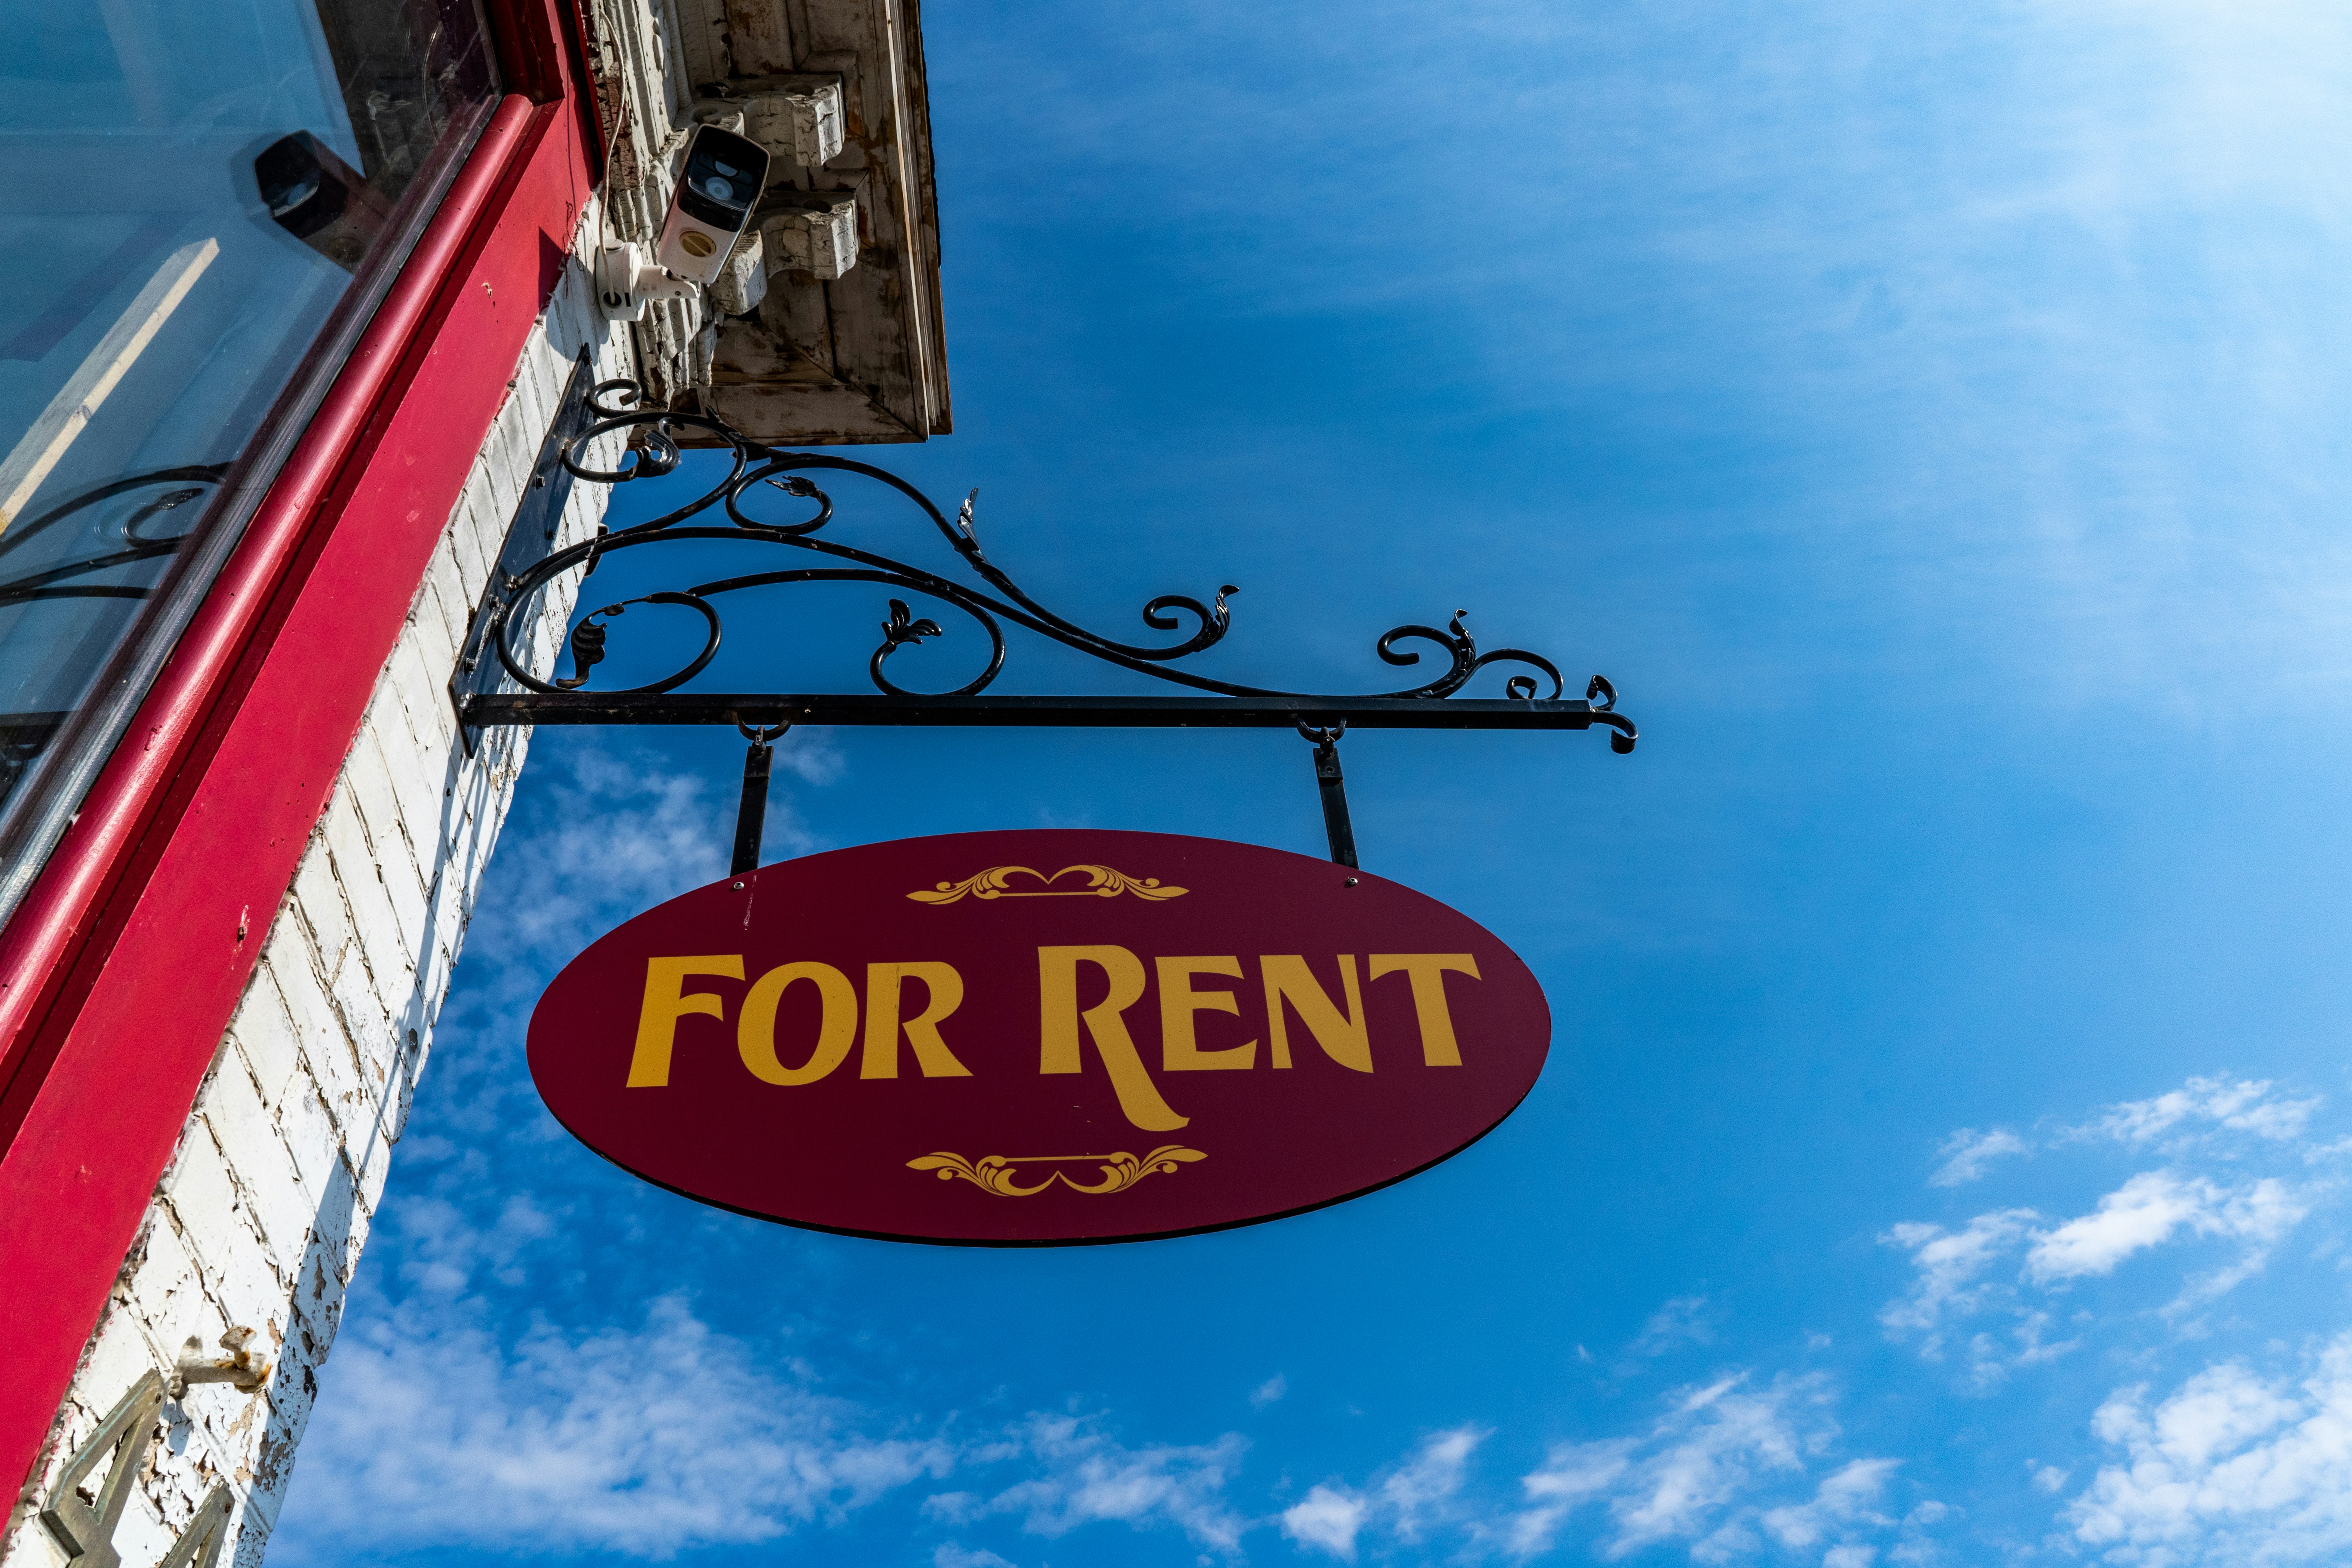 Businesses Fall Behind on Rent